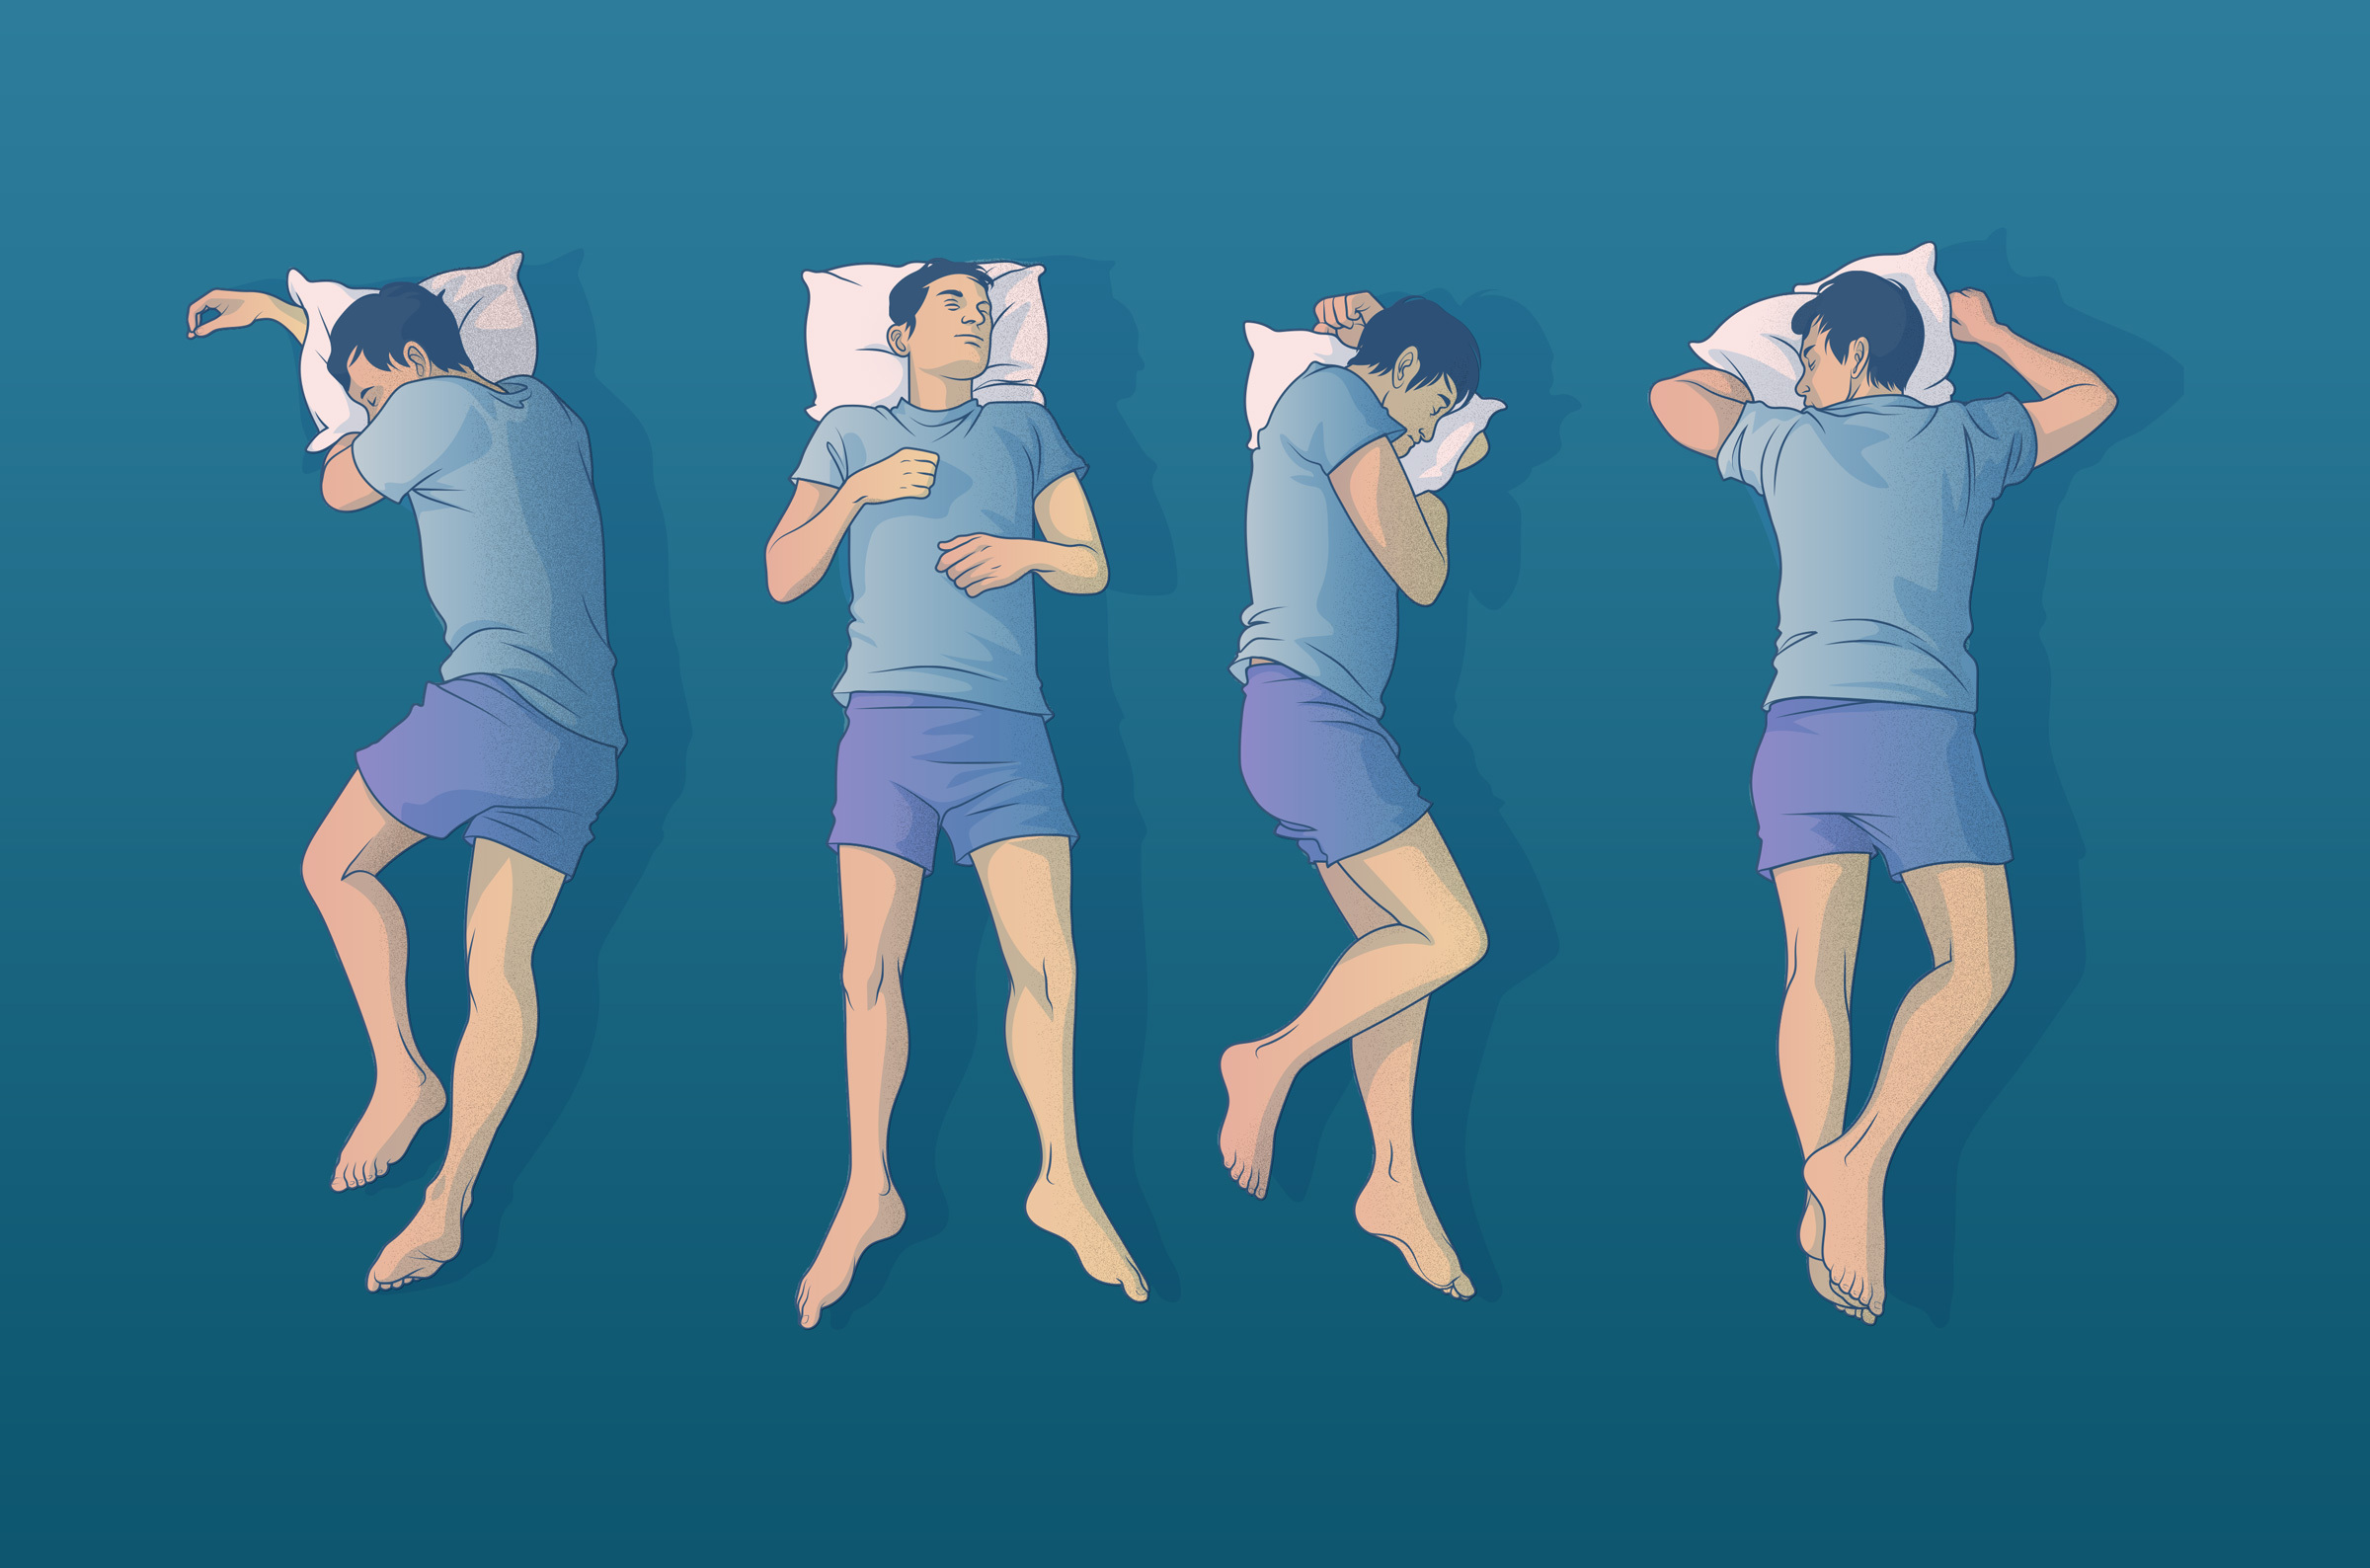 Best and Worst Sleep Positions for Health Conditions